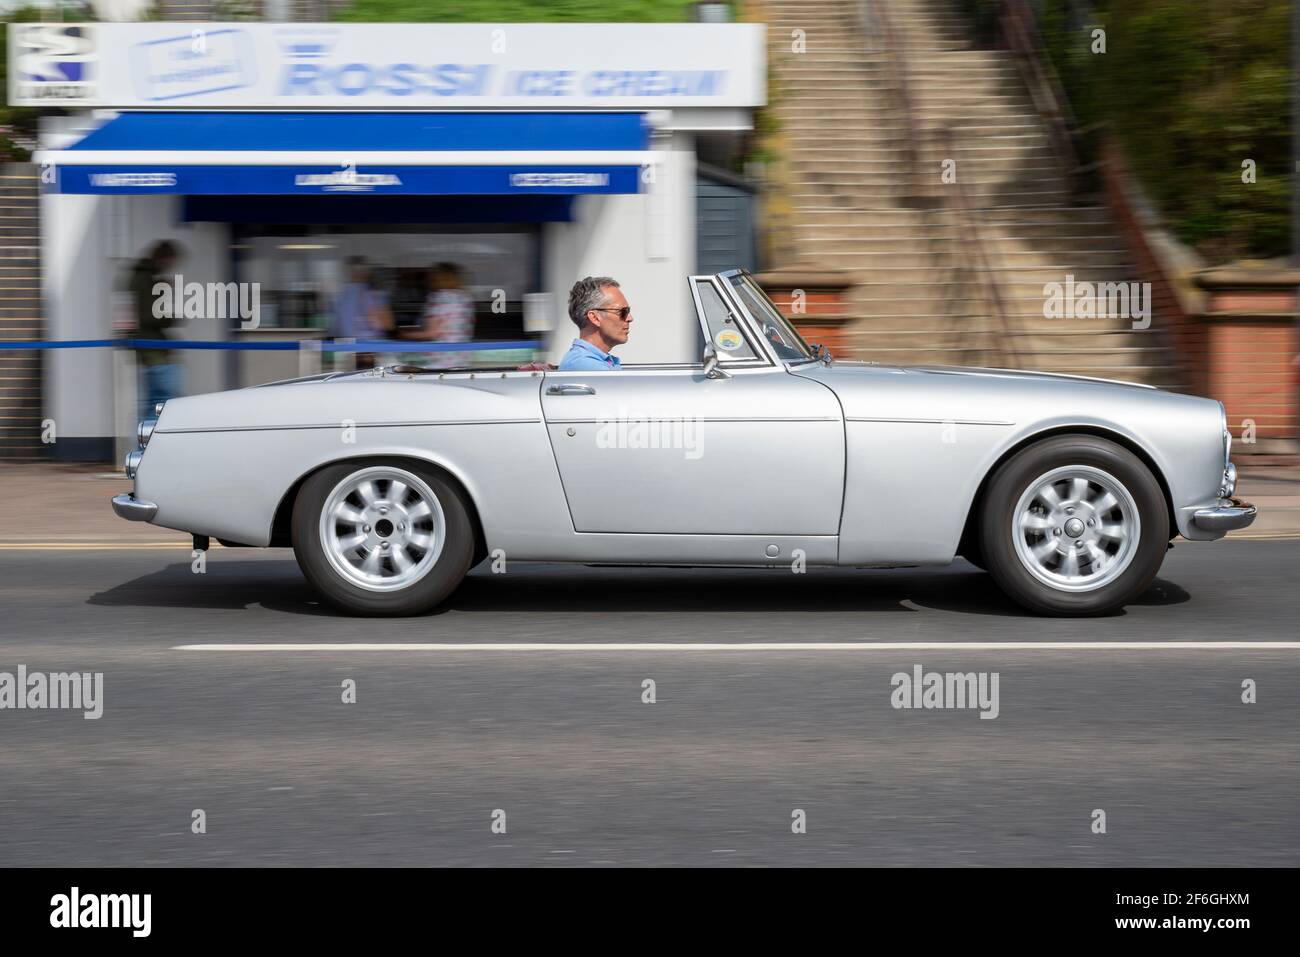 1966 Datsun Fairlady sports car driving in Southend on Sea, Essex, UK. Roadster convertible with the top down. Japanese Nissan classic car Stock Photo